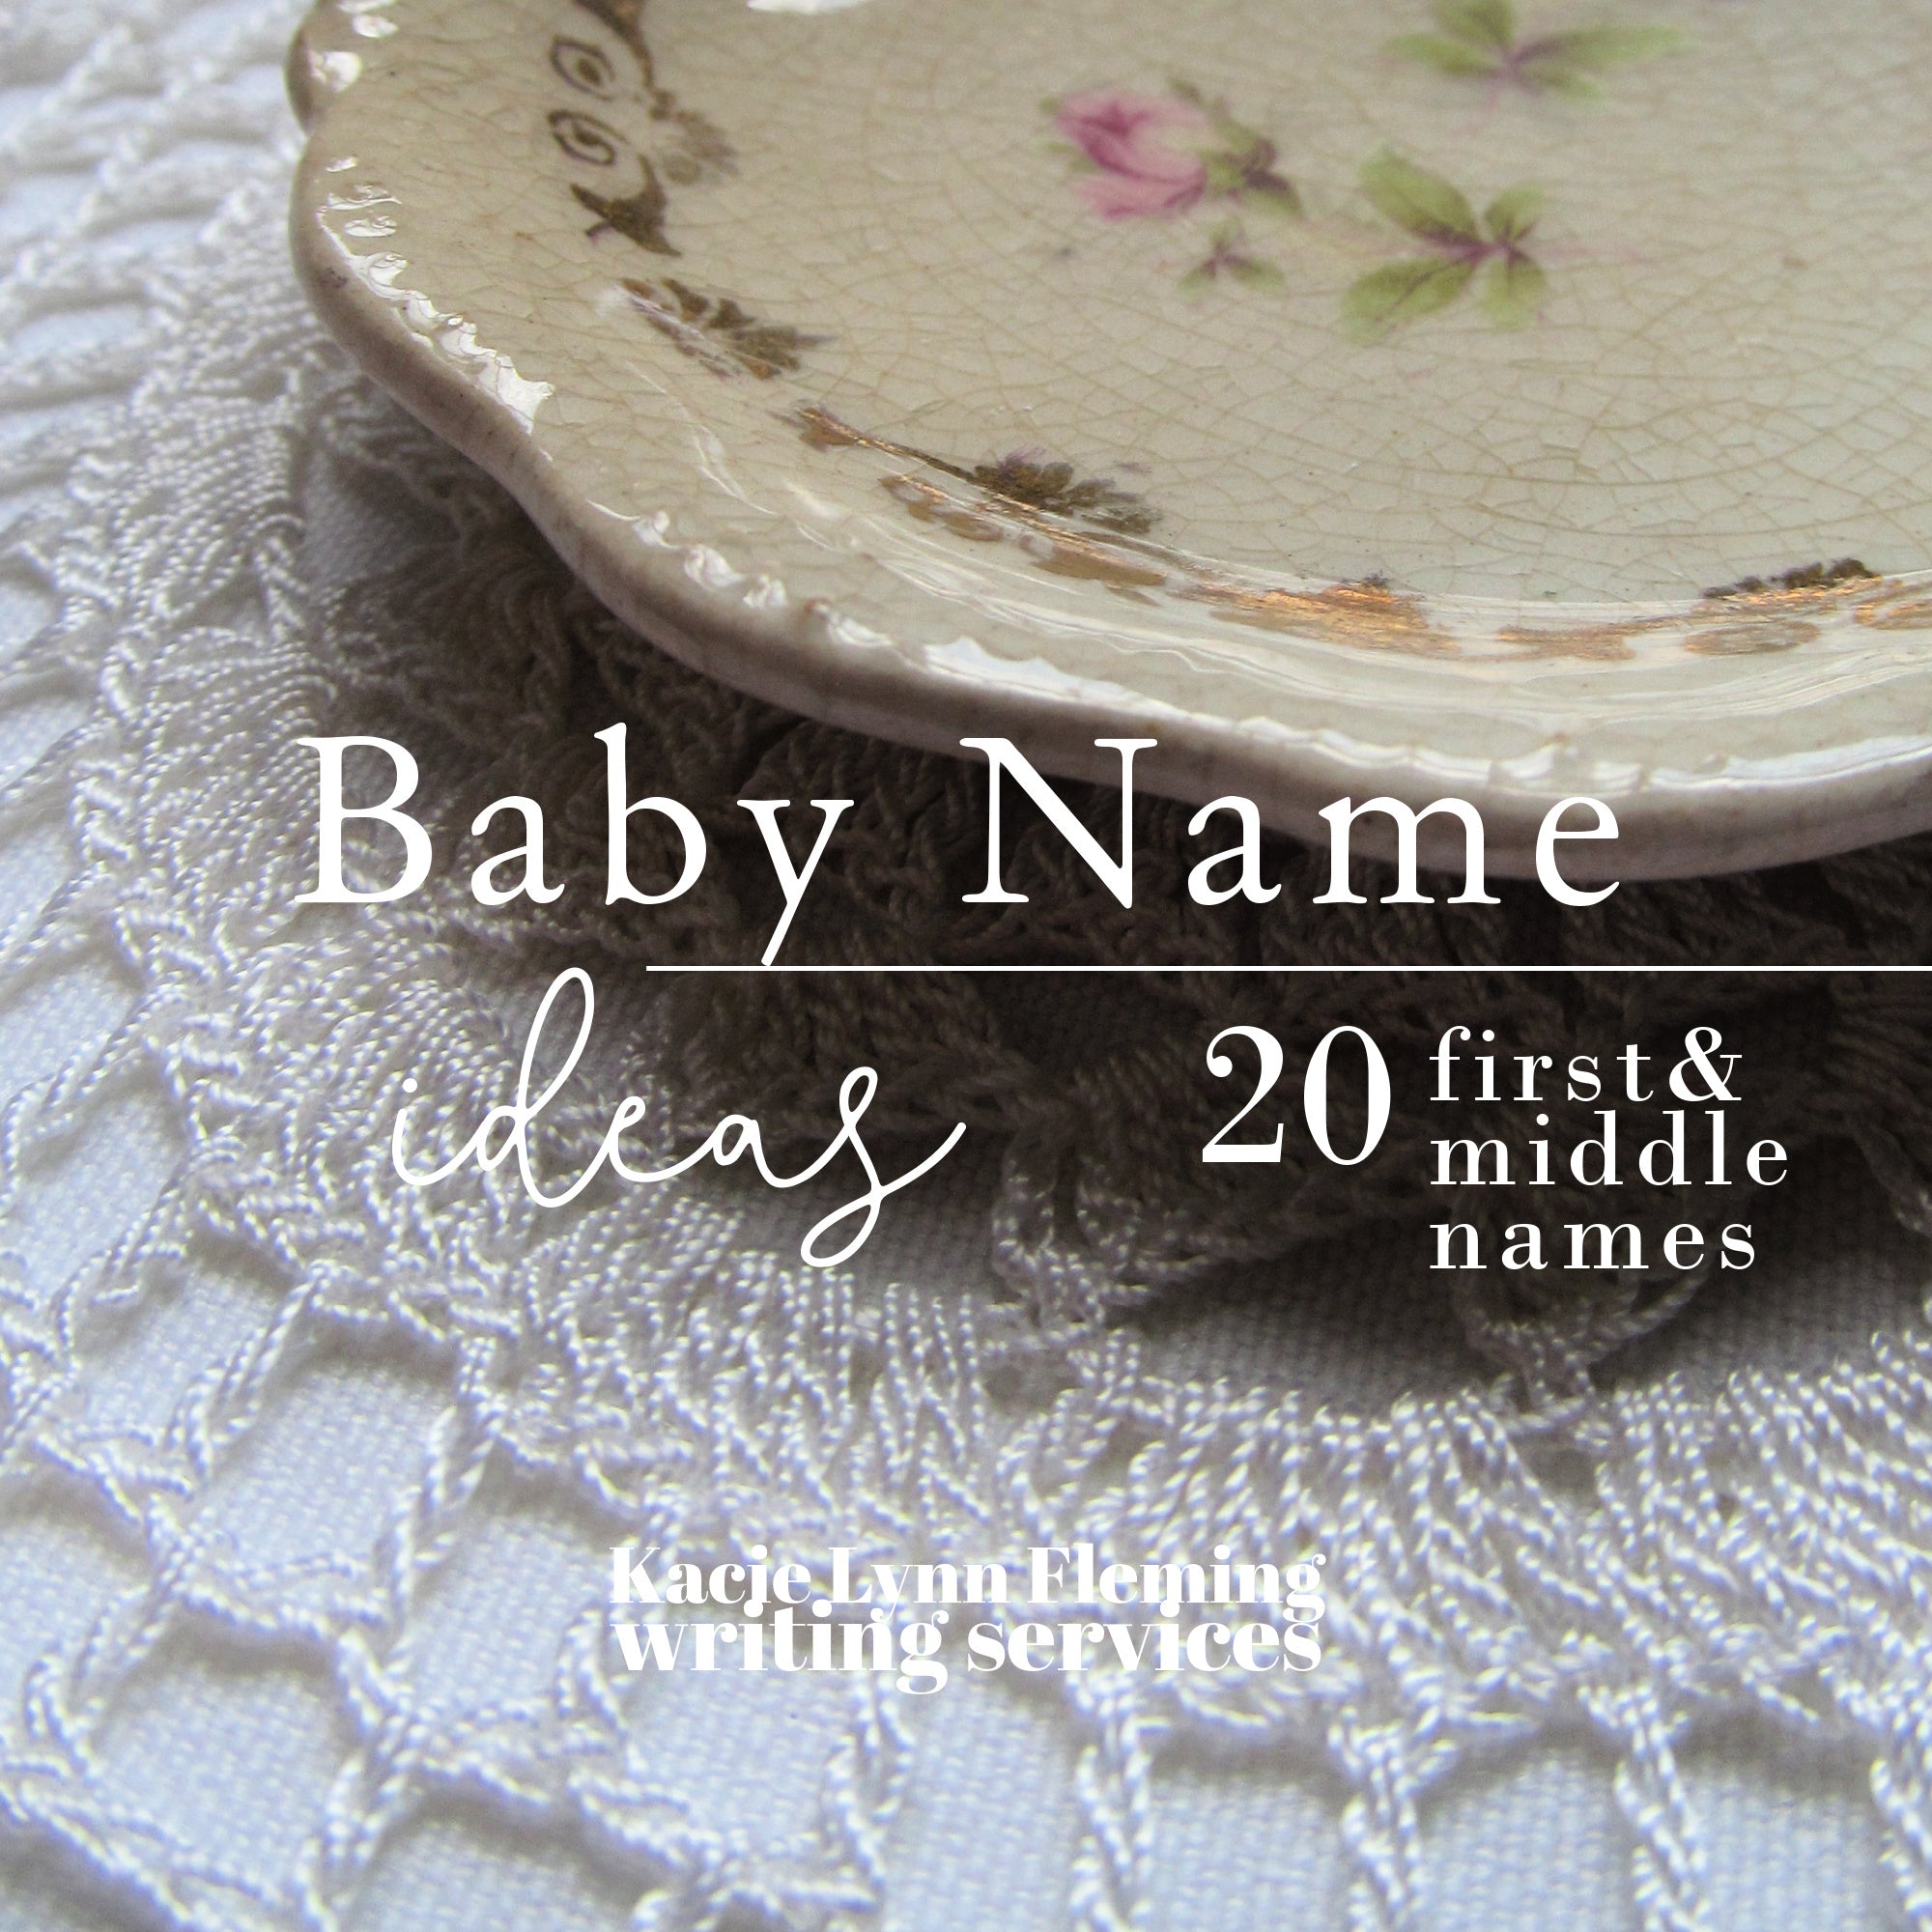 Baby Name Ideas - 20 First and Middle Names